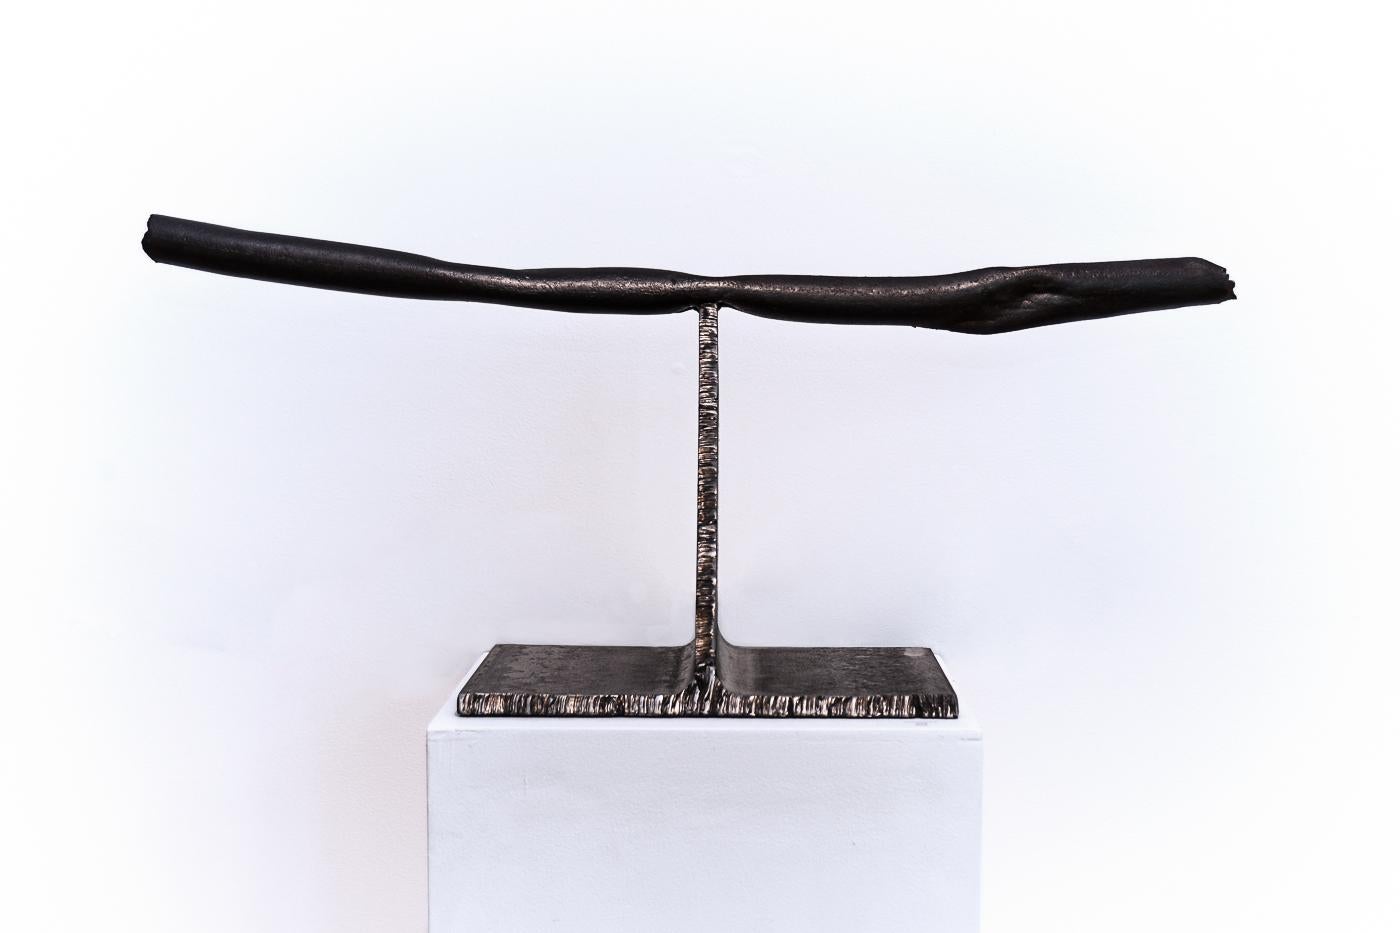 Flucking Up
Steel
Measures: 36 x 12 x 14 in.

Artist statement:

I seldom use stock material, but prefer distressed and rusted steel that has been scarred, bent, and made imperfect. In this state, the material becomes quite beautiful. There are